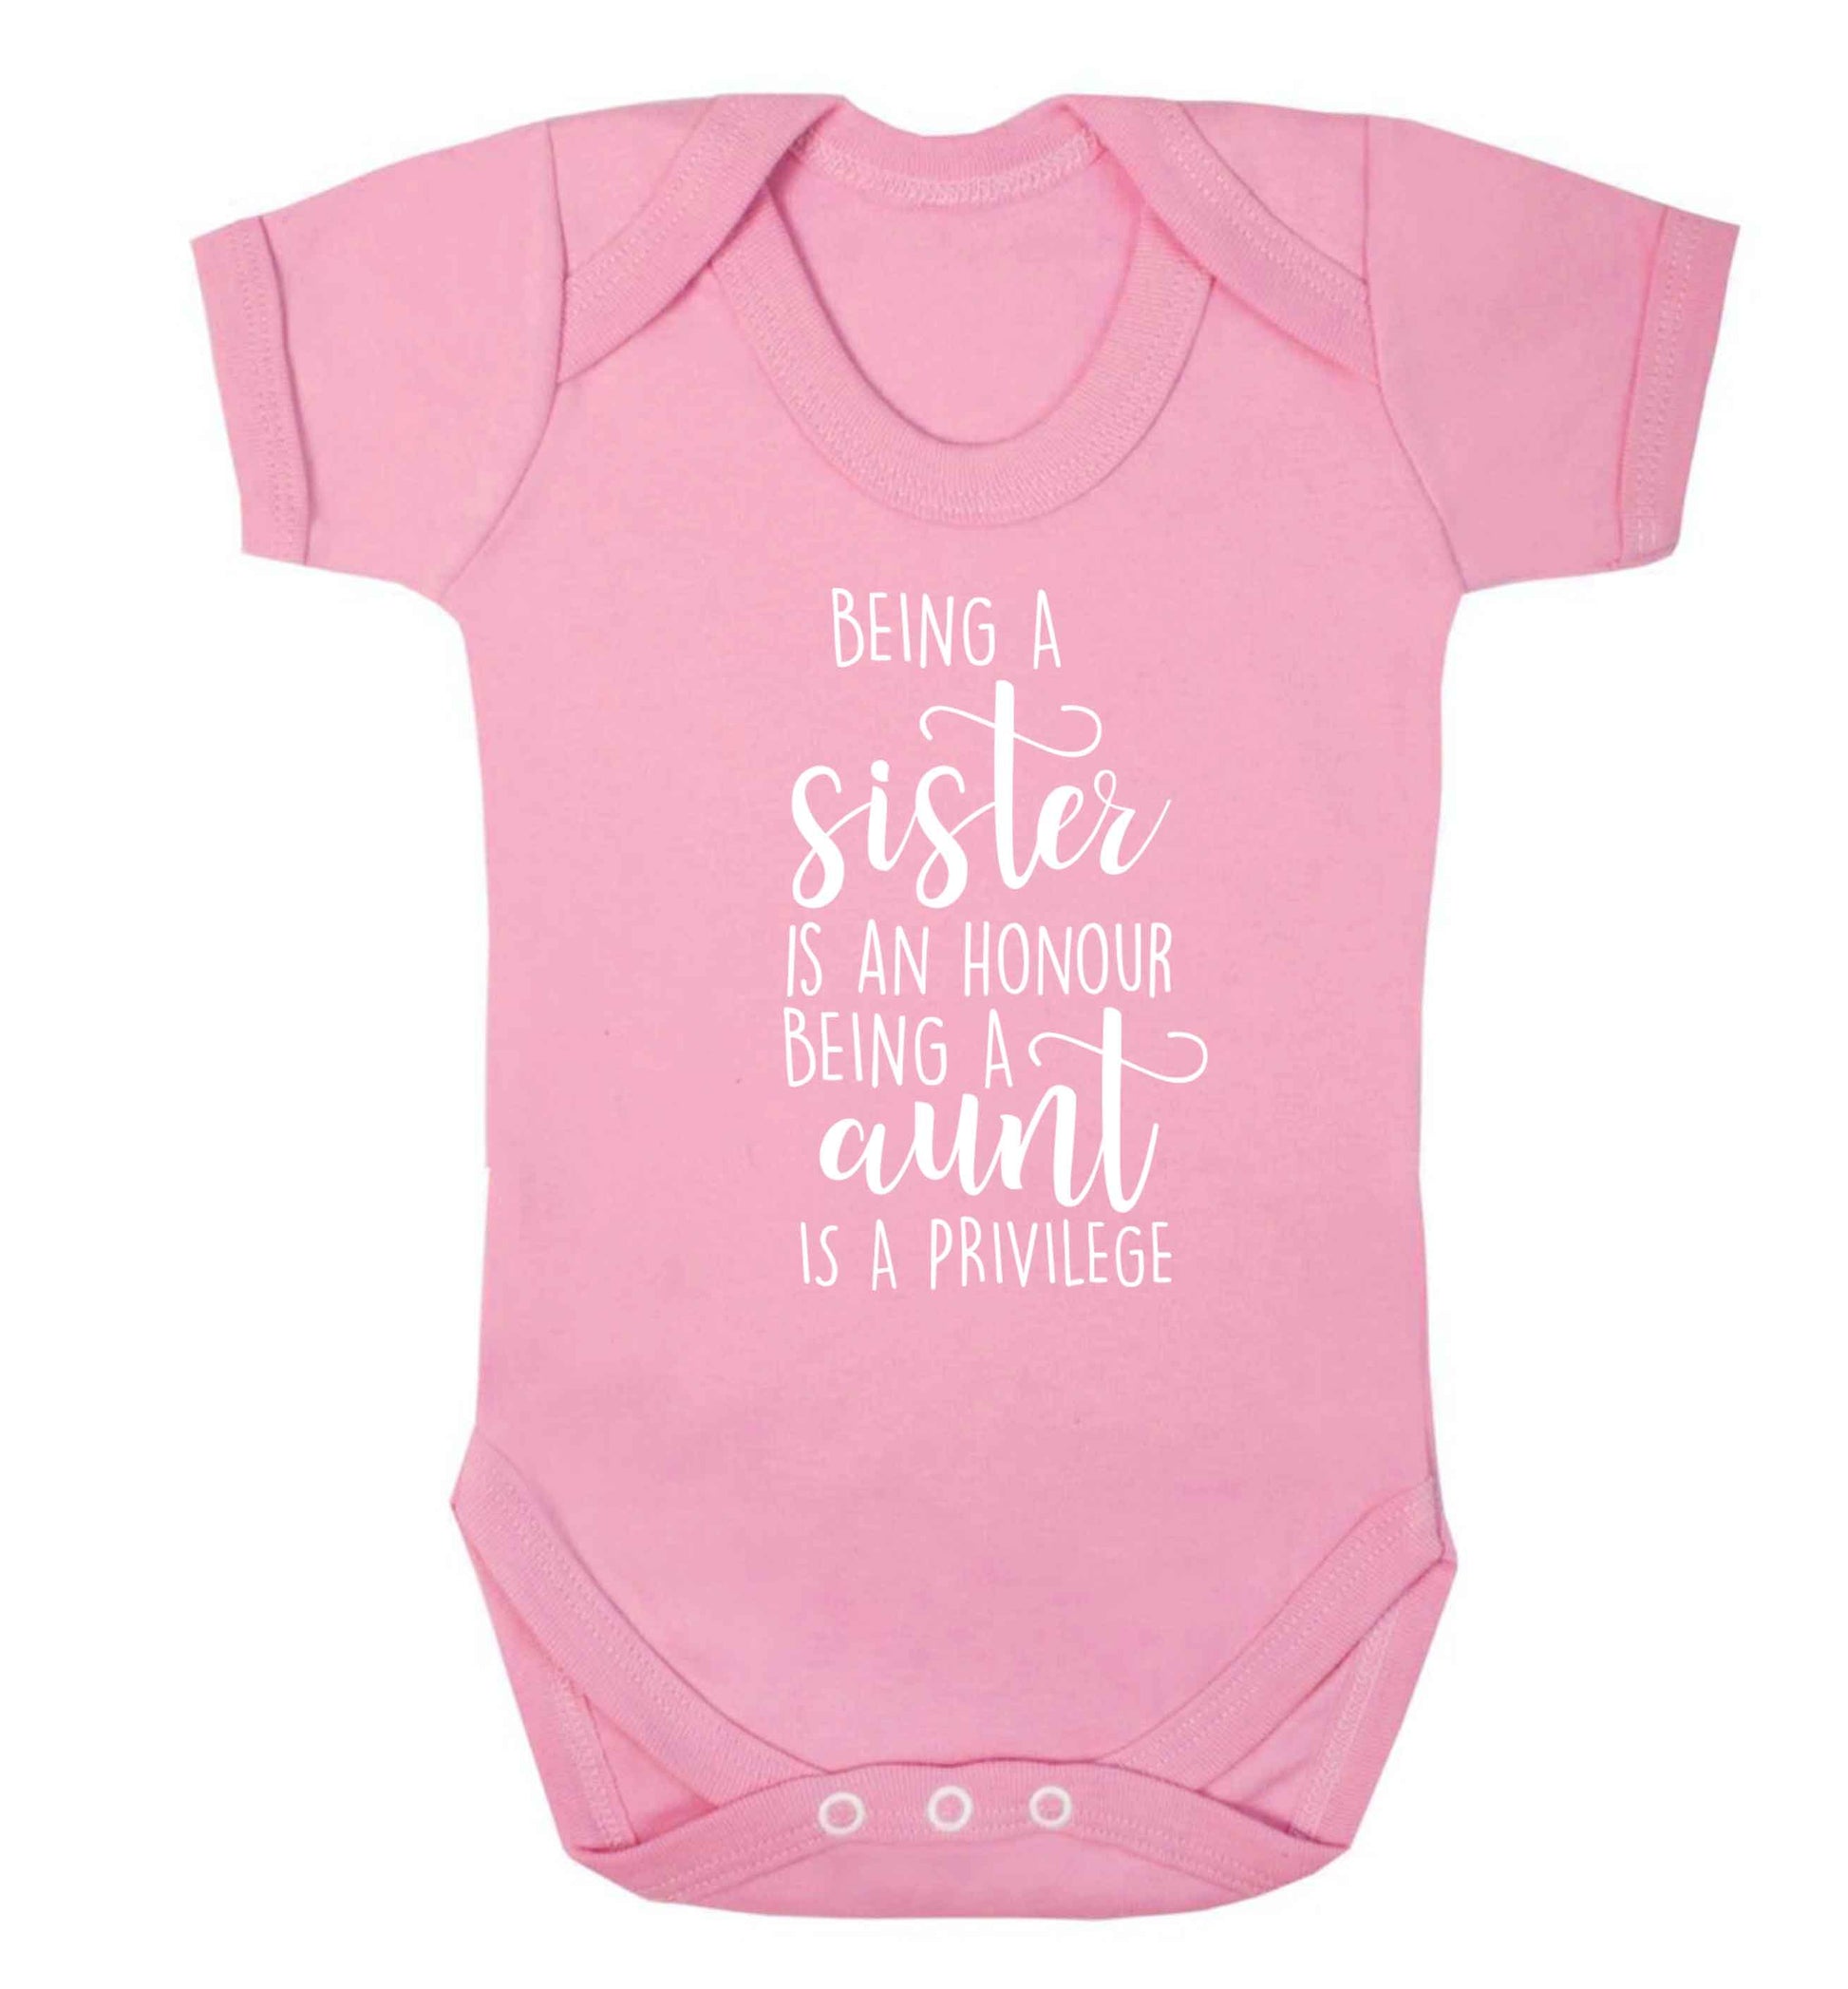 Being a sister is an honour being an auntie is a privilege Baby Vest pale pink 18-24 months